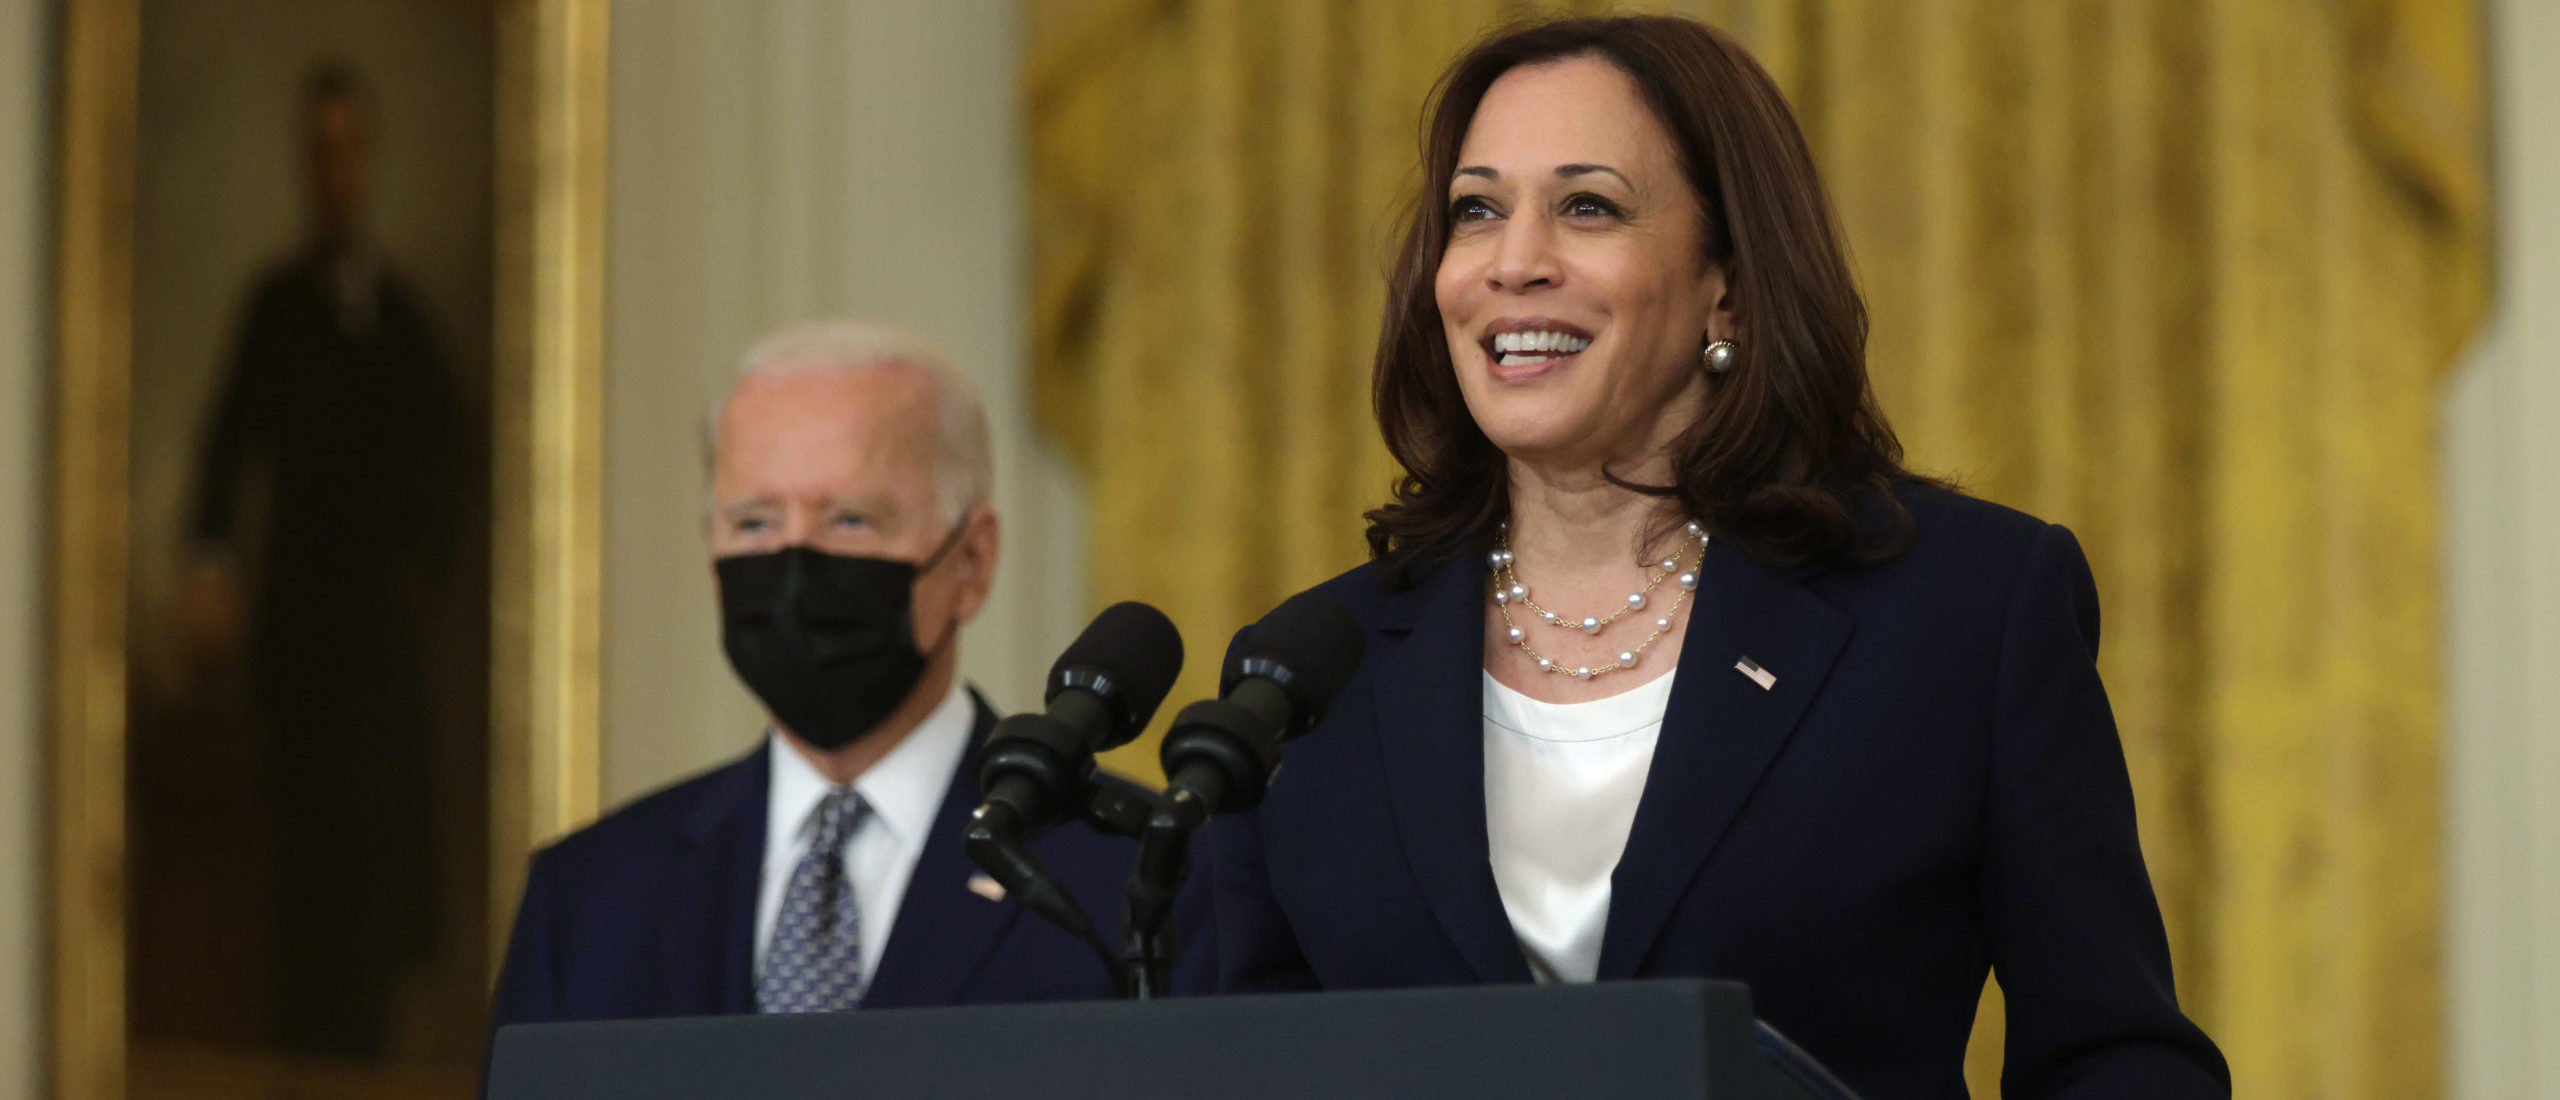 Vice President Kamala Harris speaks as President Joe Biden listens during an event at the White House last week. (Alex Wong/Getty Images)